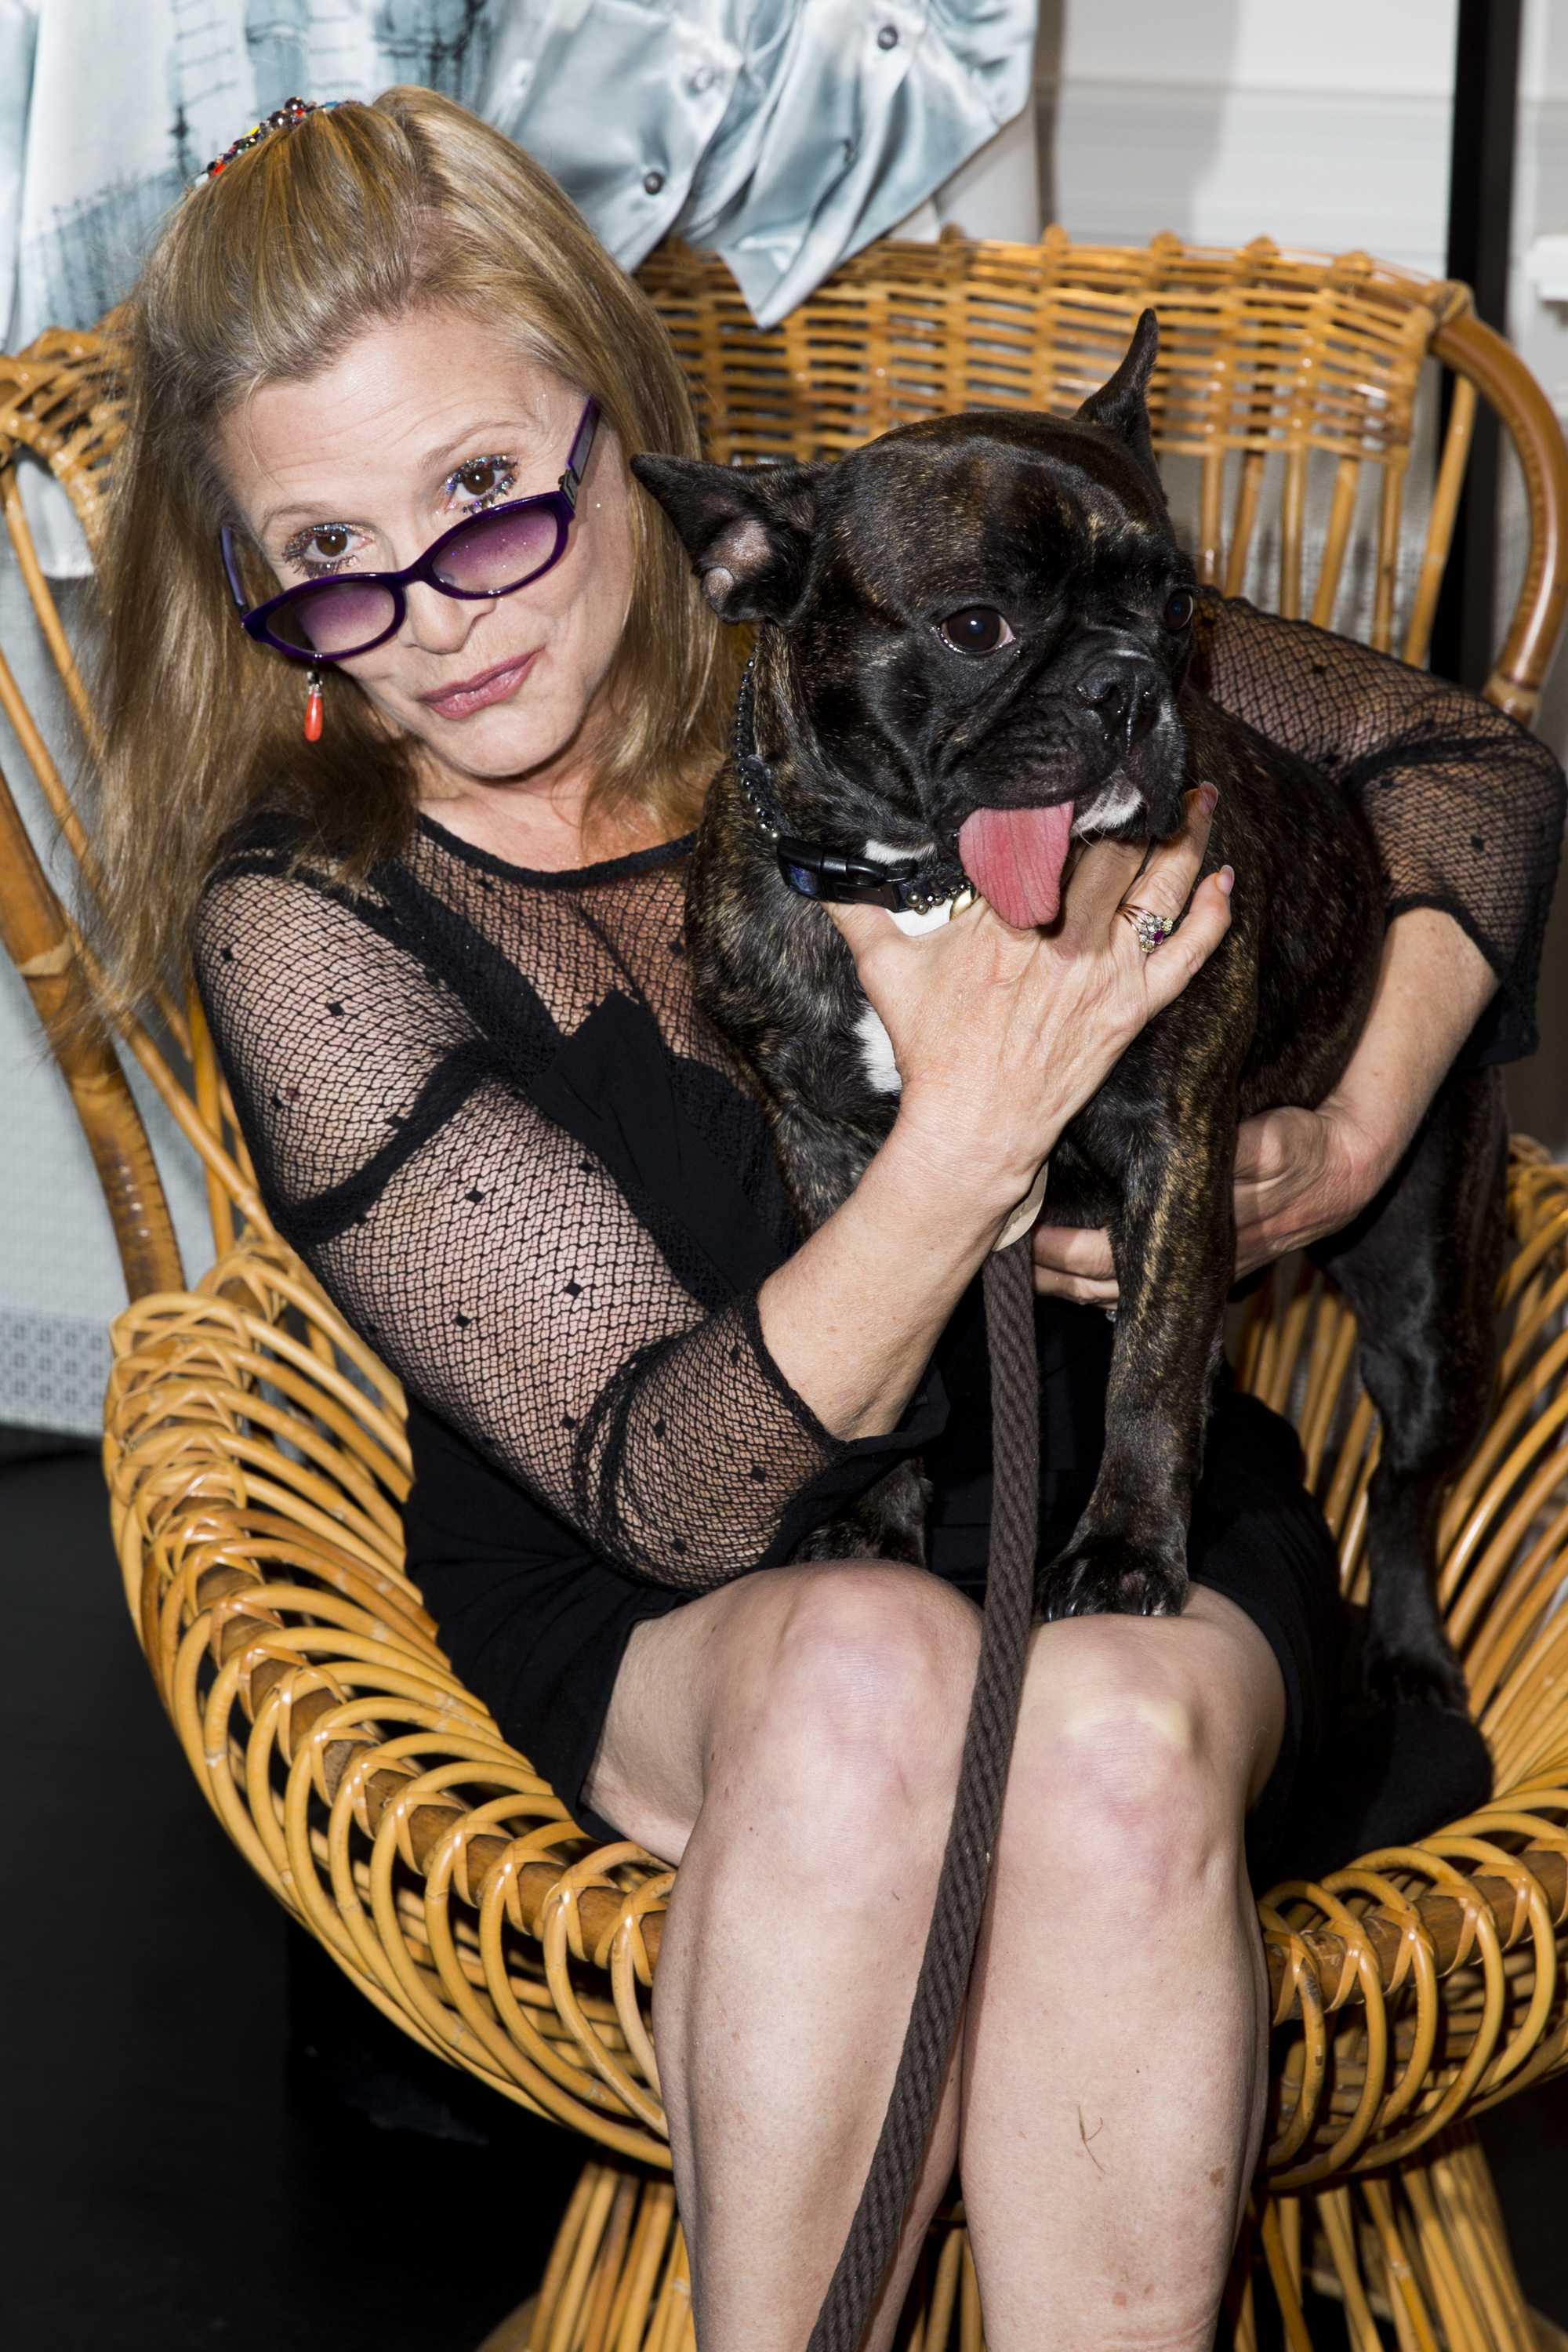 Carrie Fisher’s dog watched her in the new 'Star Wars' trailer